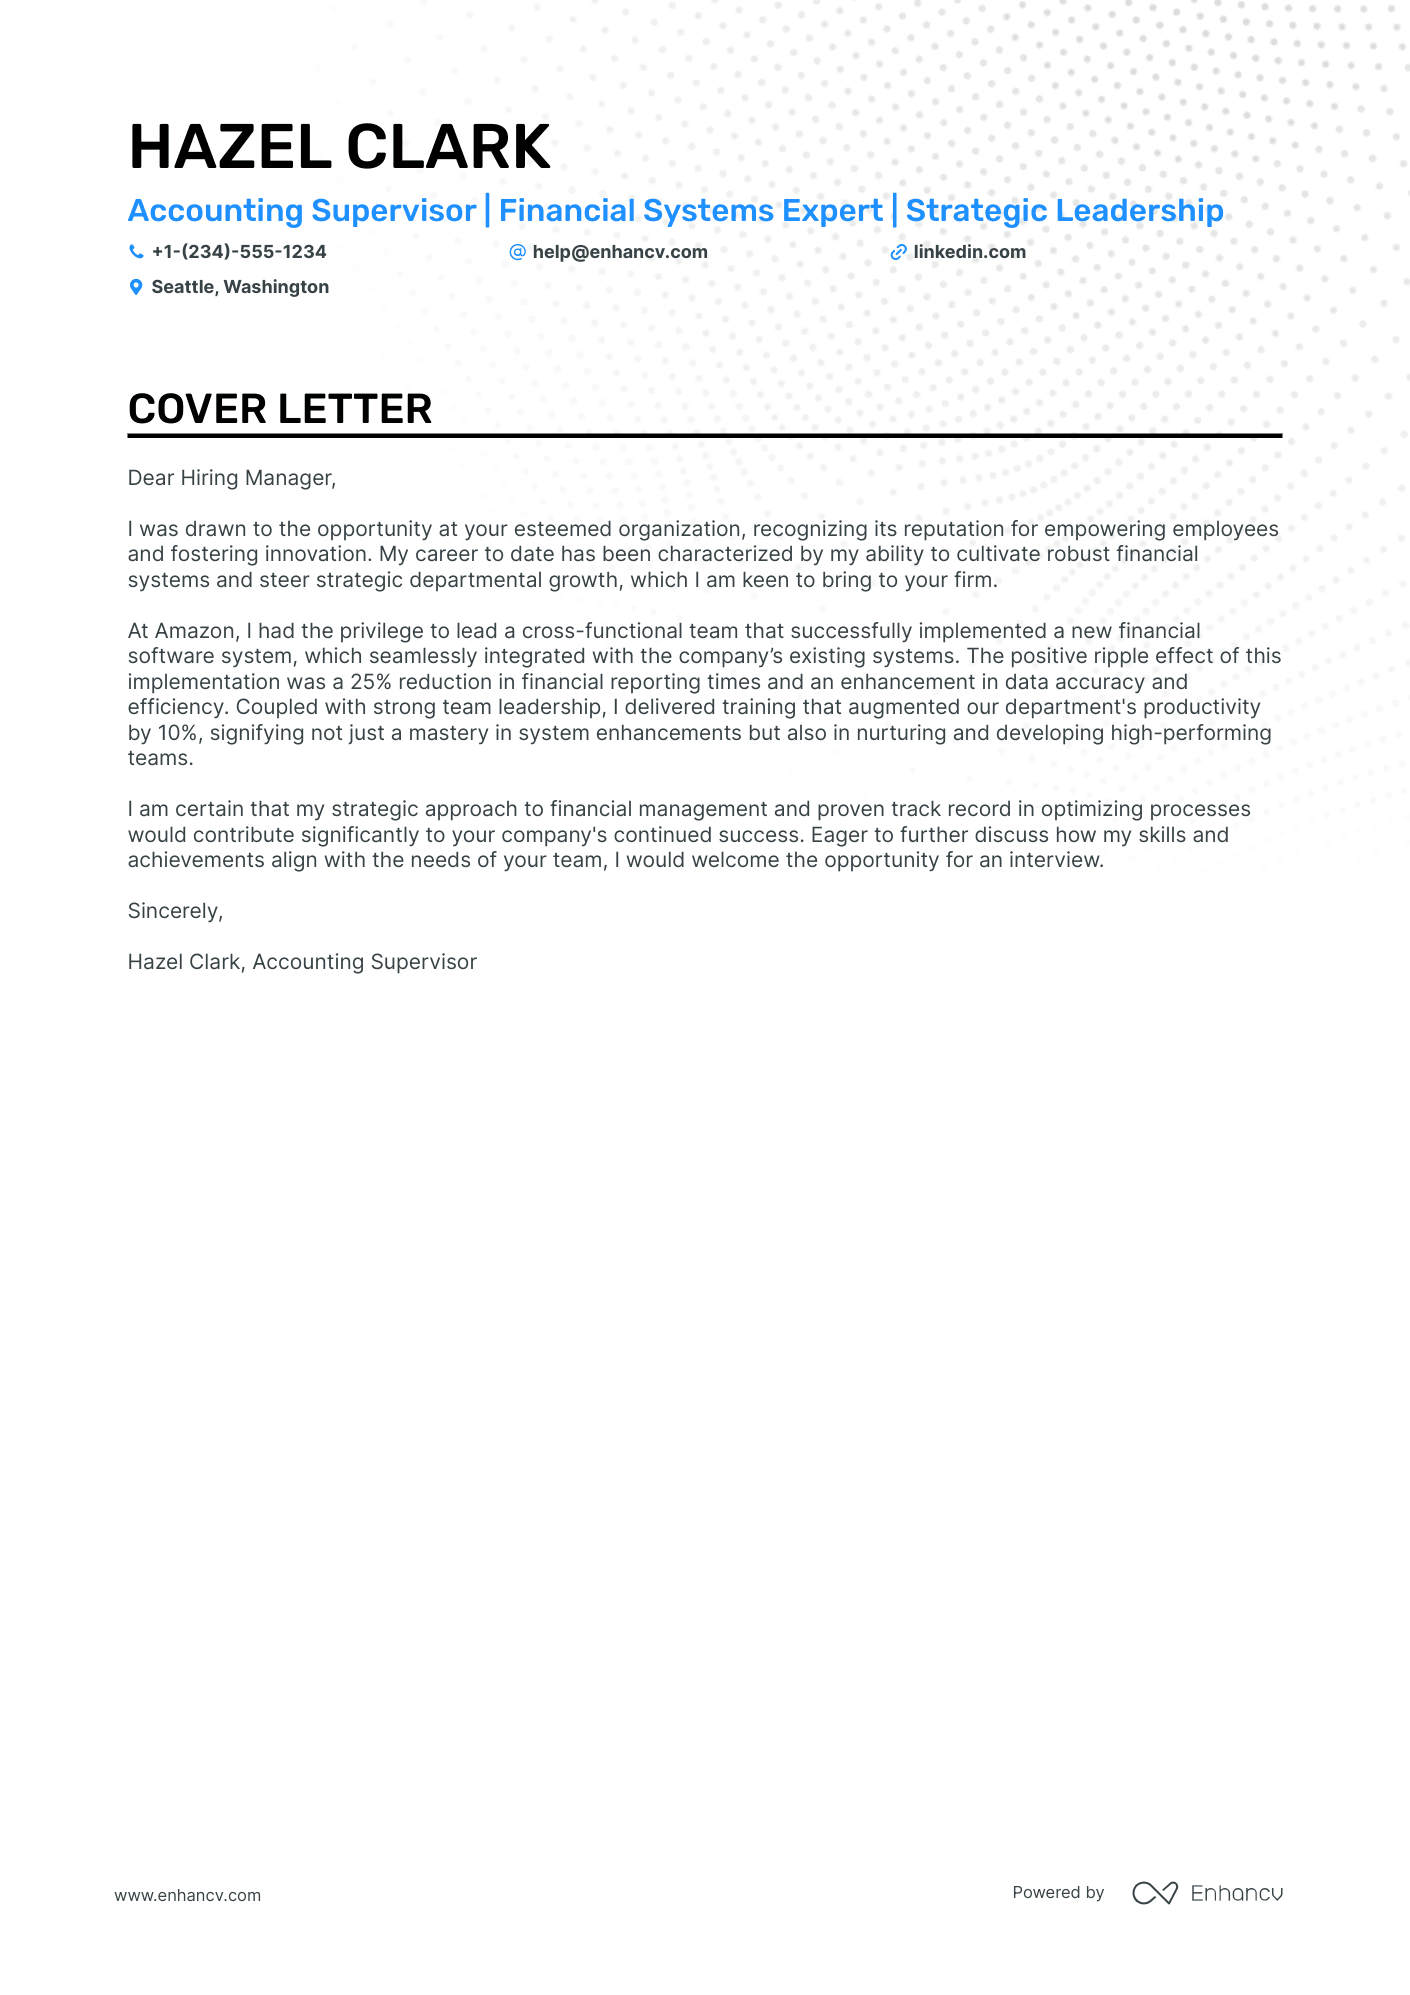 Accounting Supervisor cover letter